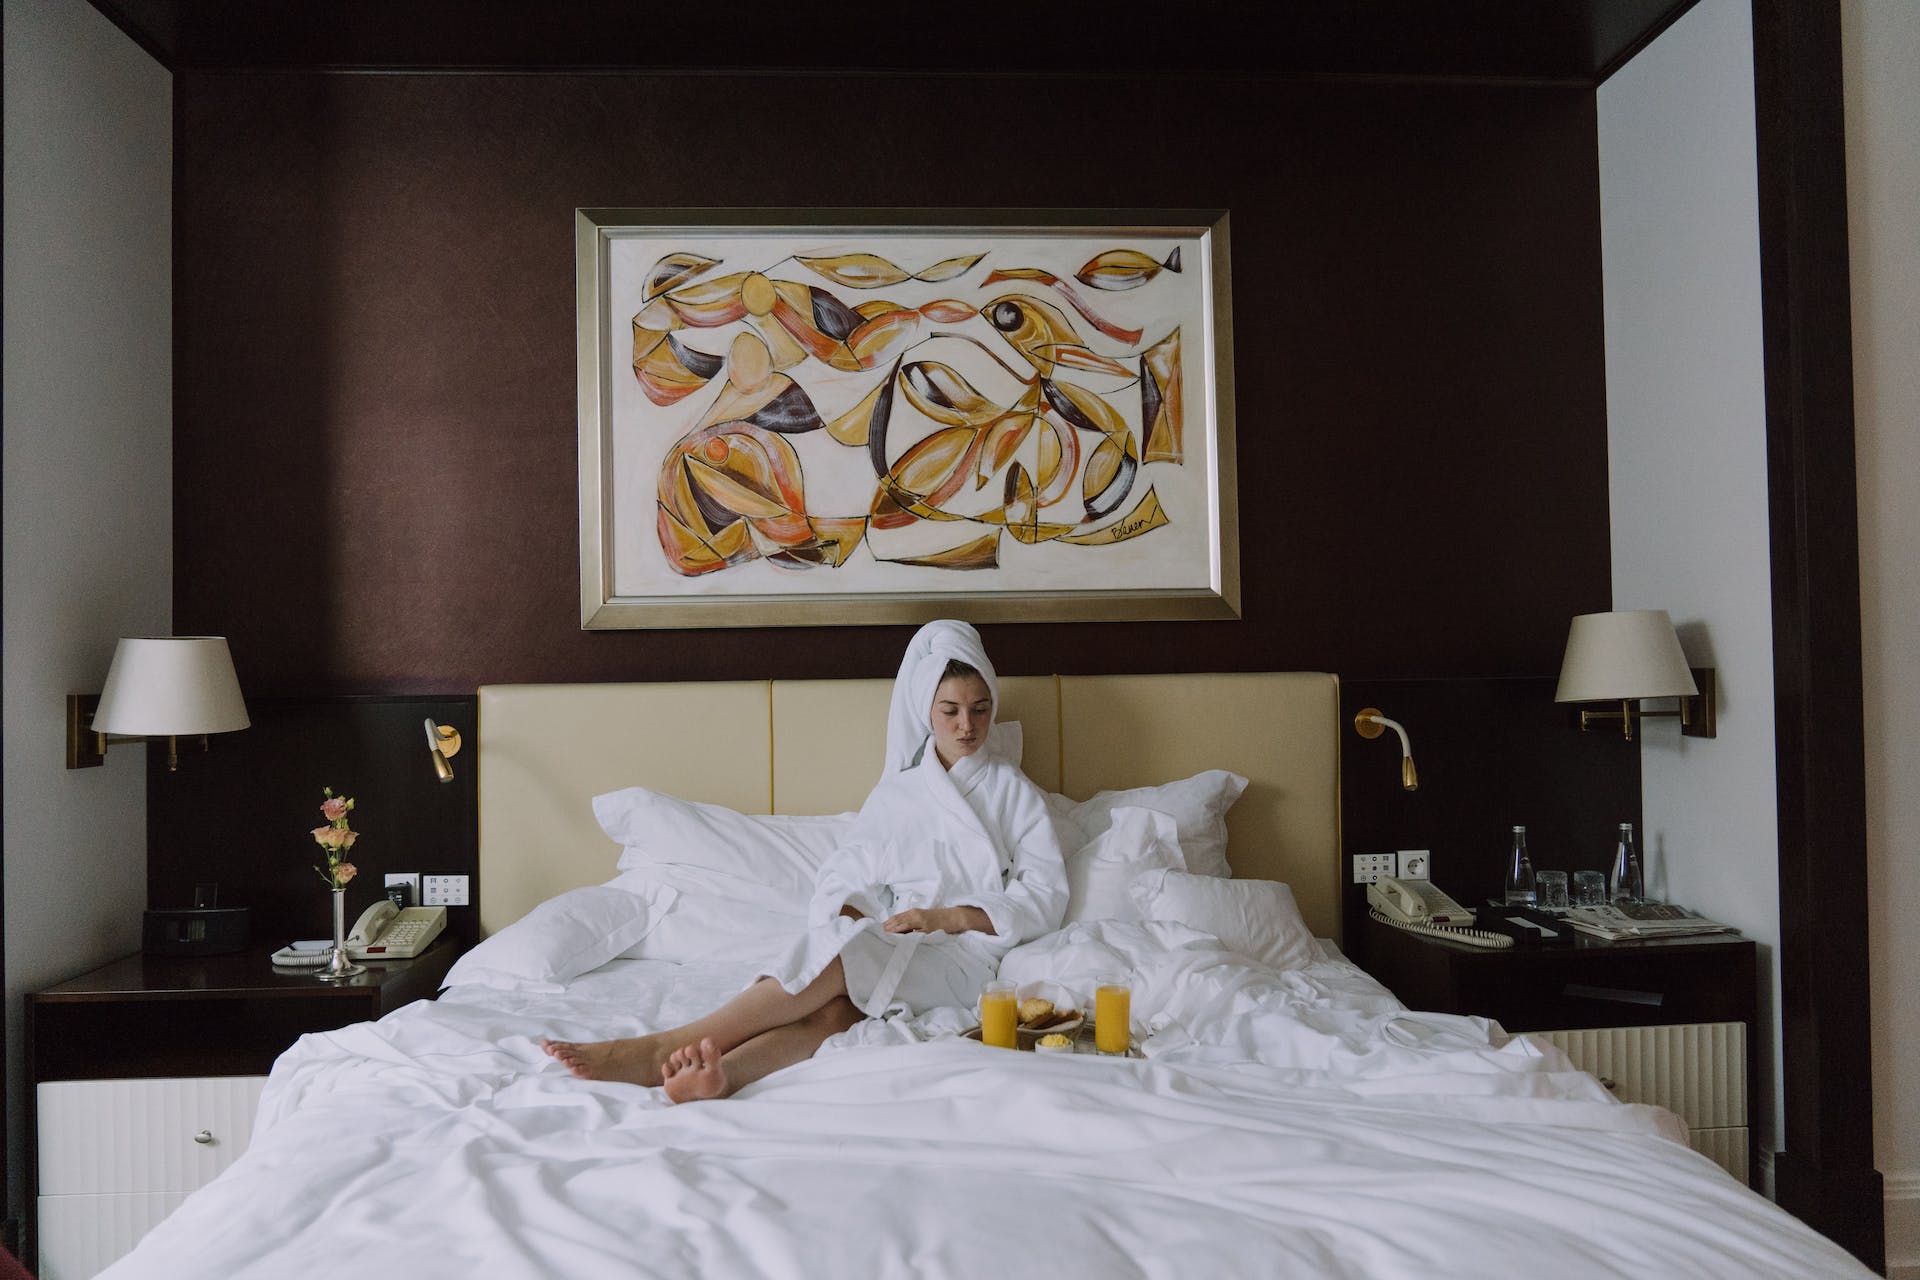 A woman in a hotel room | Source: Pexels